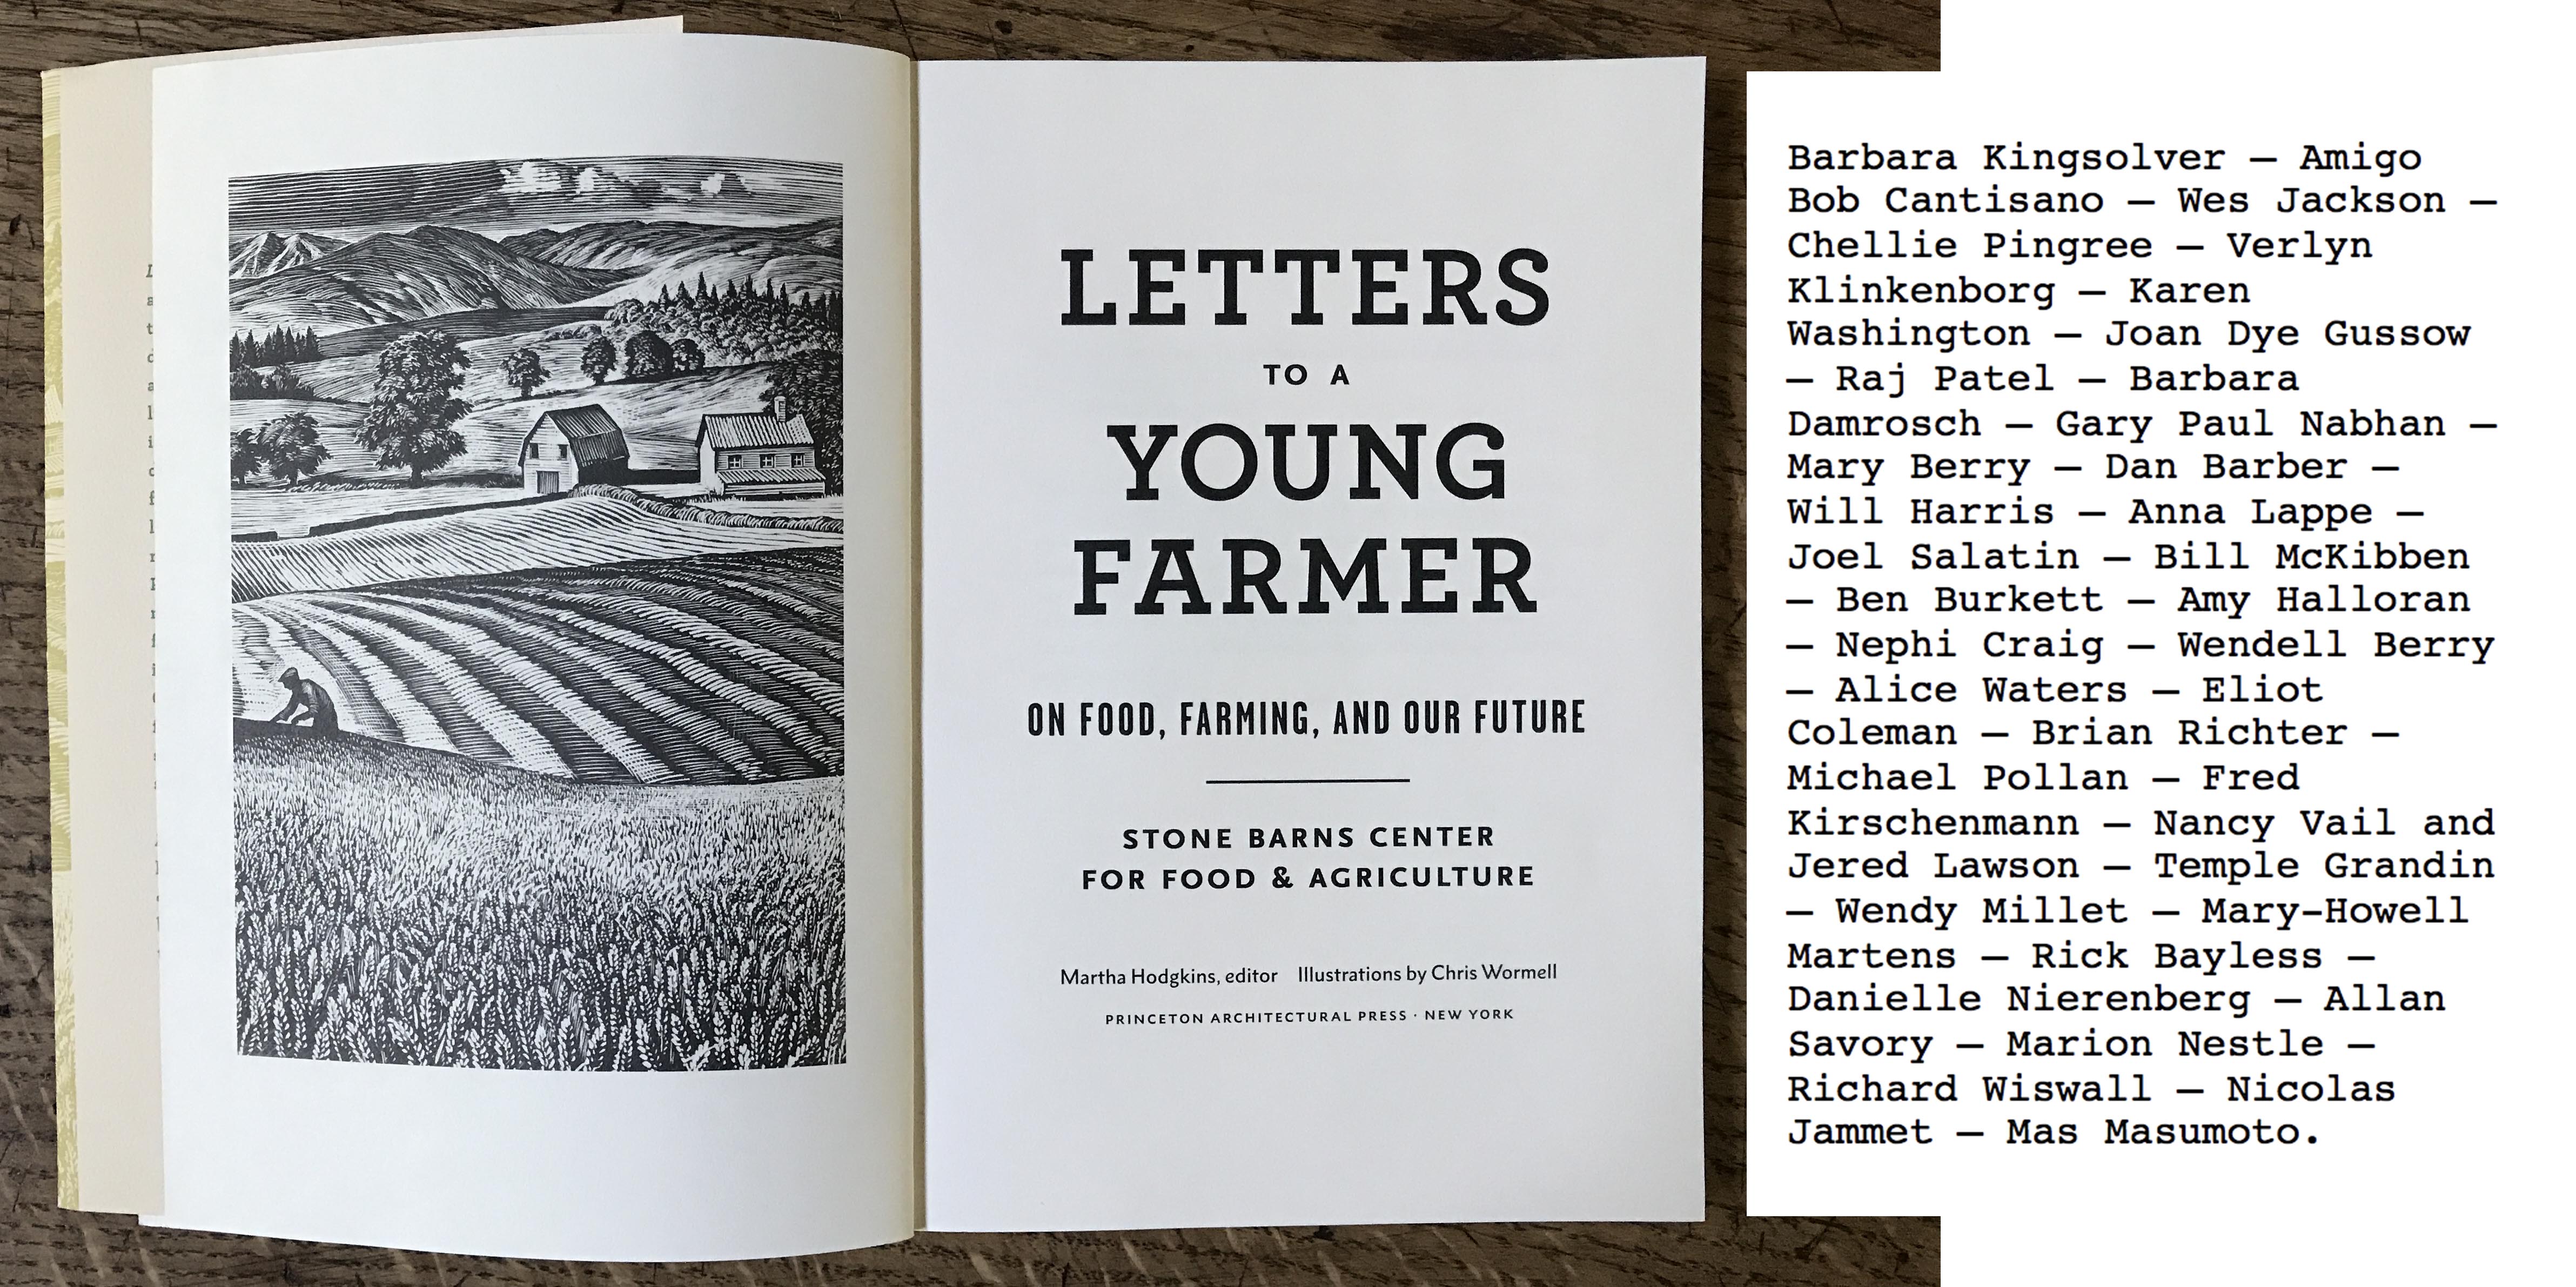 "Letters to a Young Farmer": On Food, Farming, and Our Future, by Martha Hodgkins